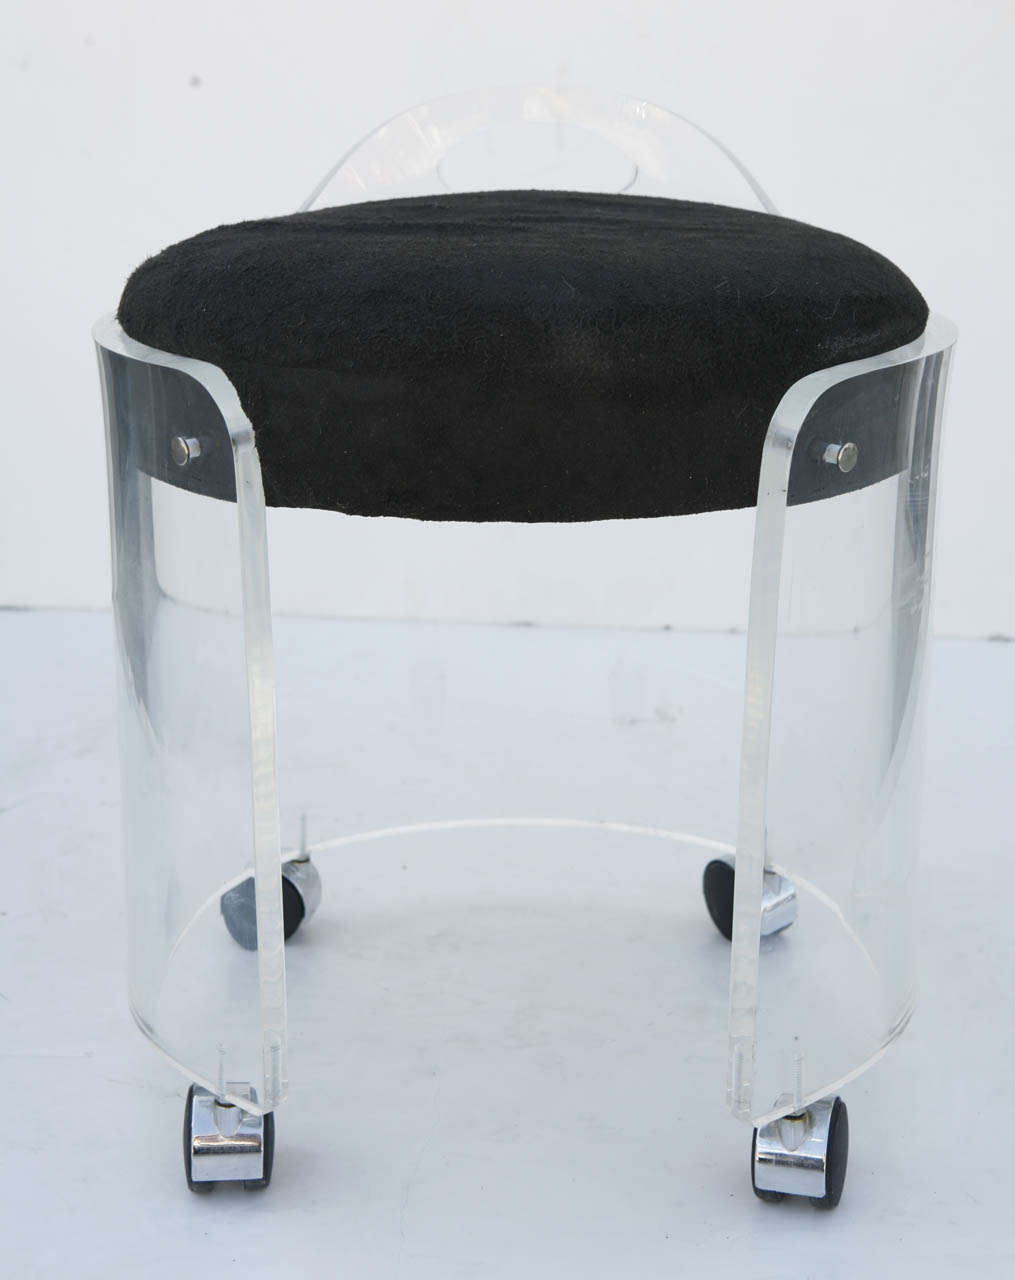 Circular lucite vanity stool with original casters by iconic designer and artist Charles Hollis Jones.